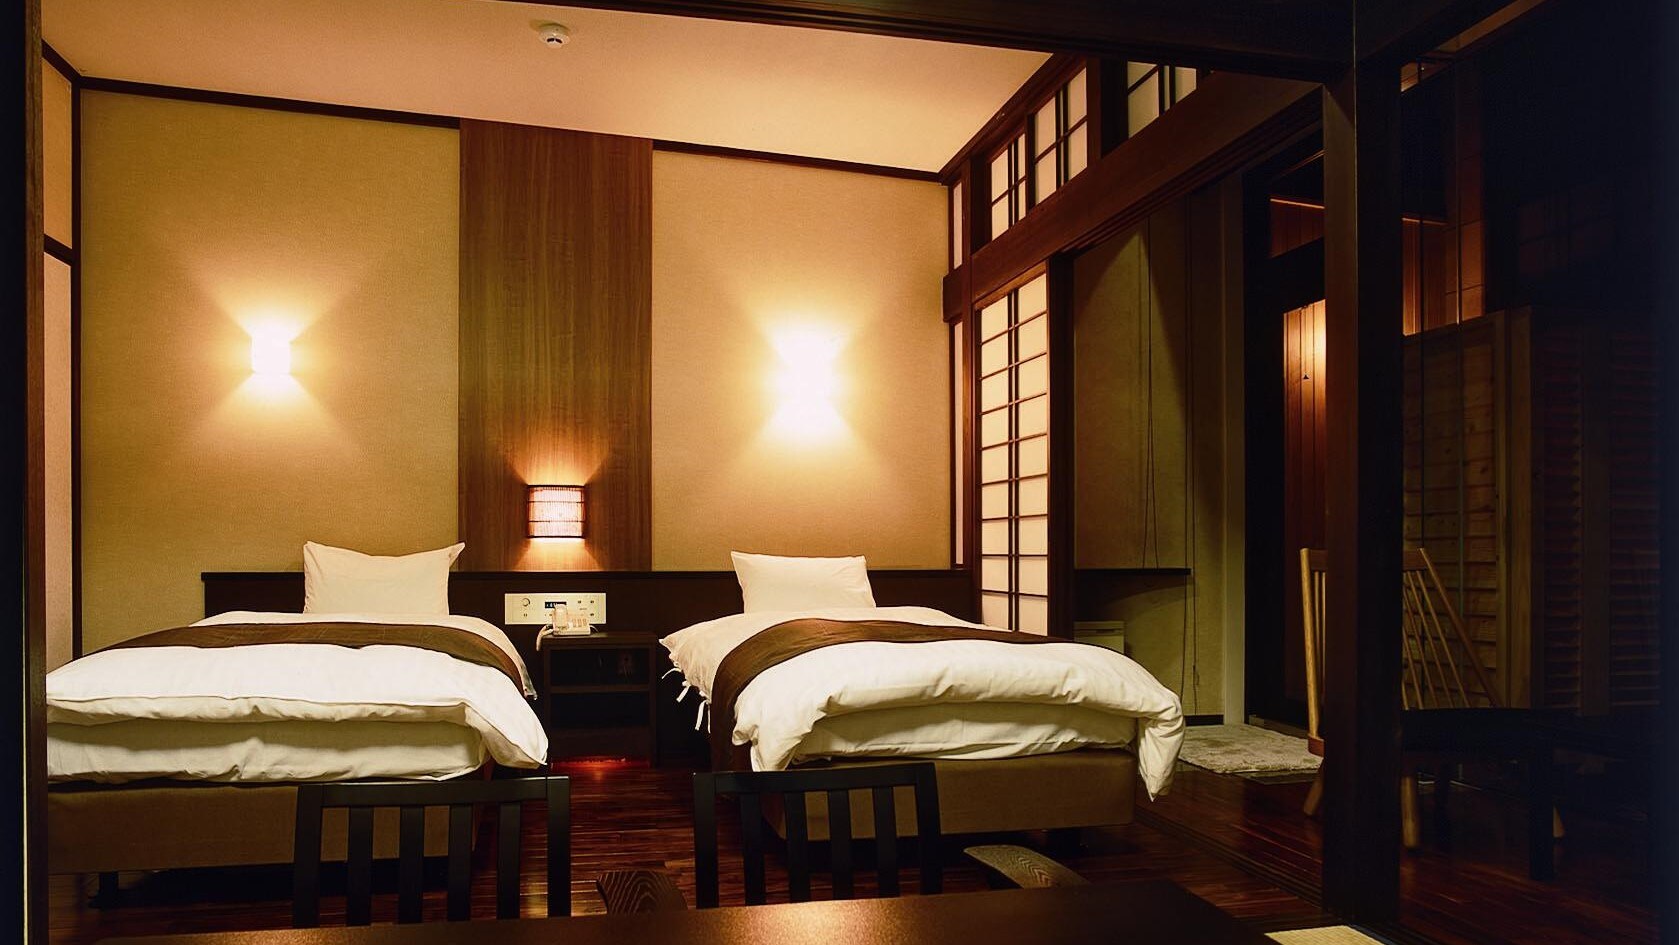 Guest room with open-air bath (Japanese and Western rooms)